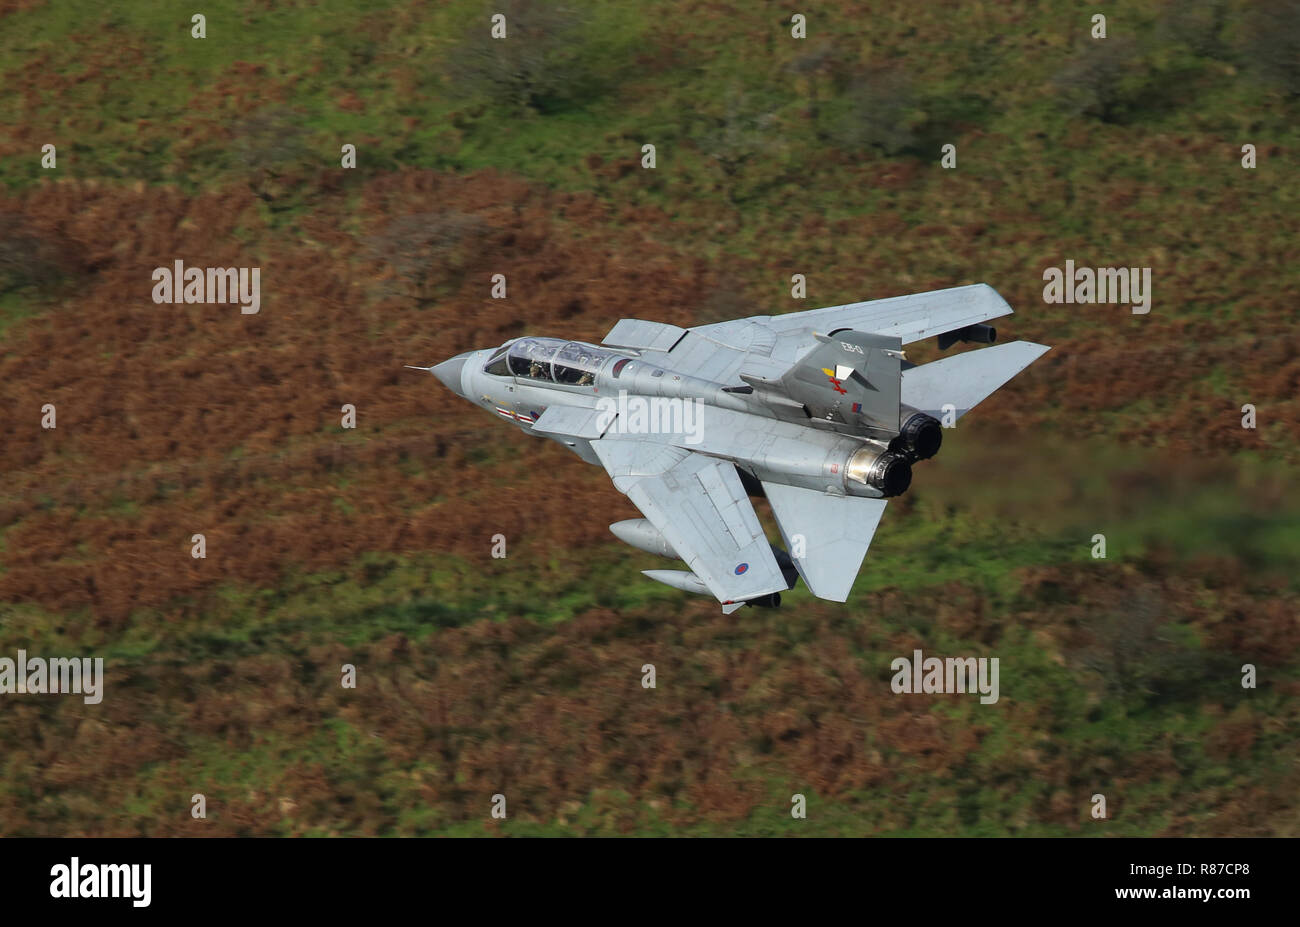 RAF Tornado GR4, serial no. ZA560, on a low level flight in the mach loop, Wales, UK.  The aircraft shows the markings of 41 Squadron. Stock Photo